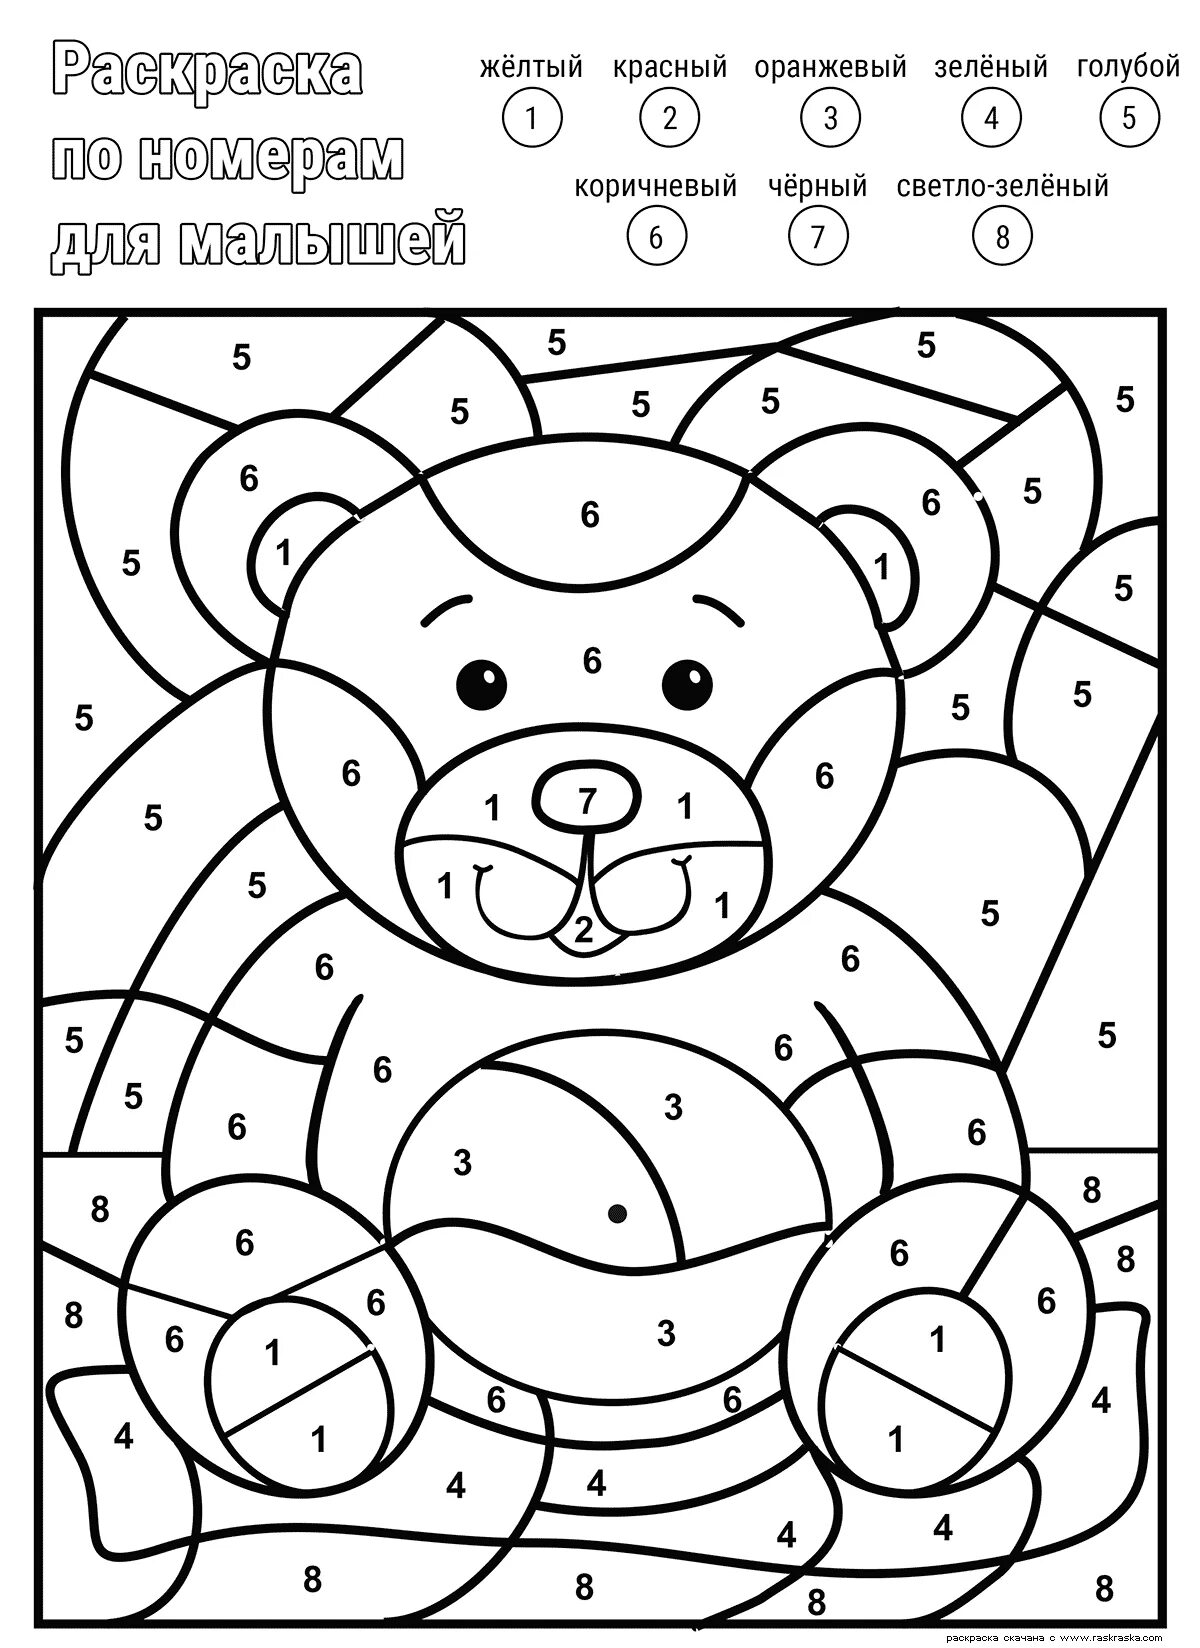 Fun coloring by numbers from photo